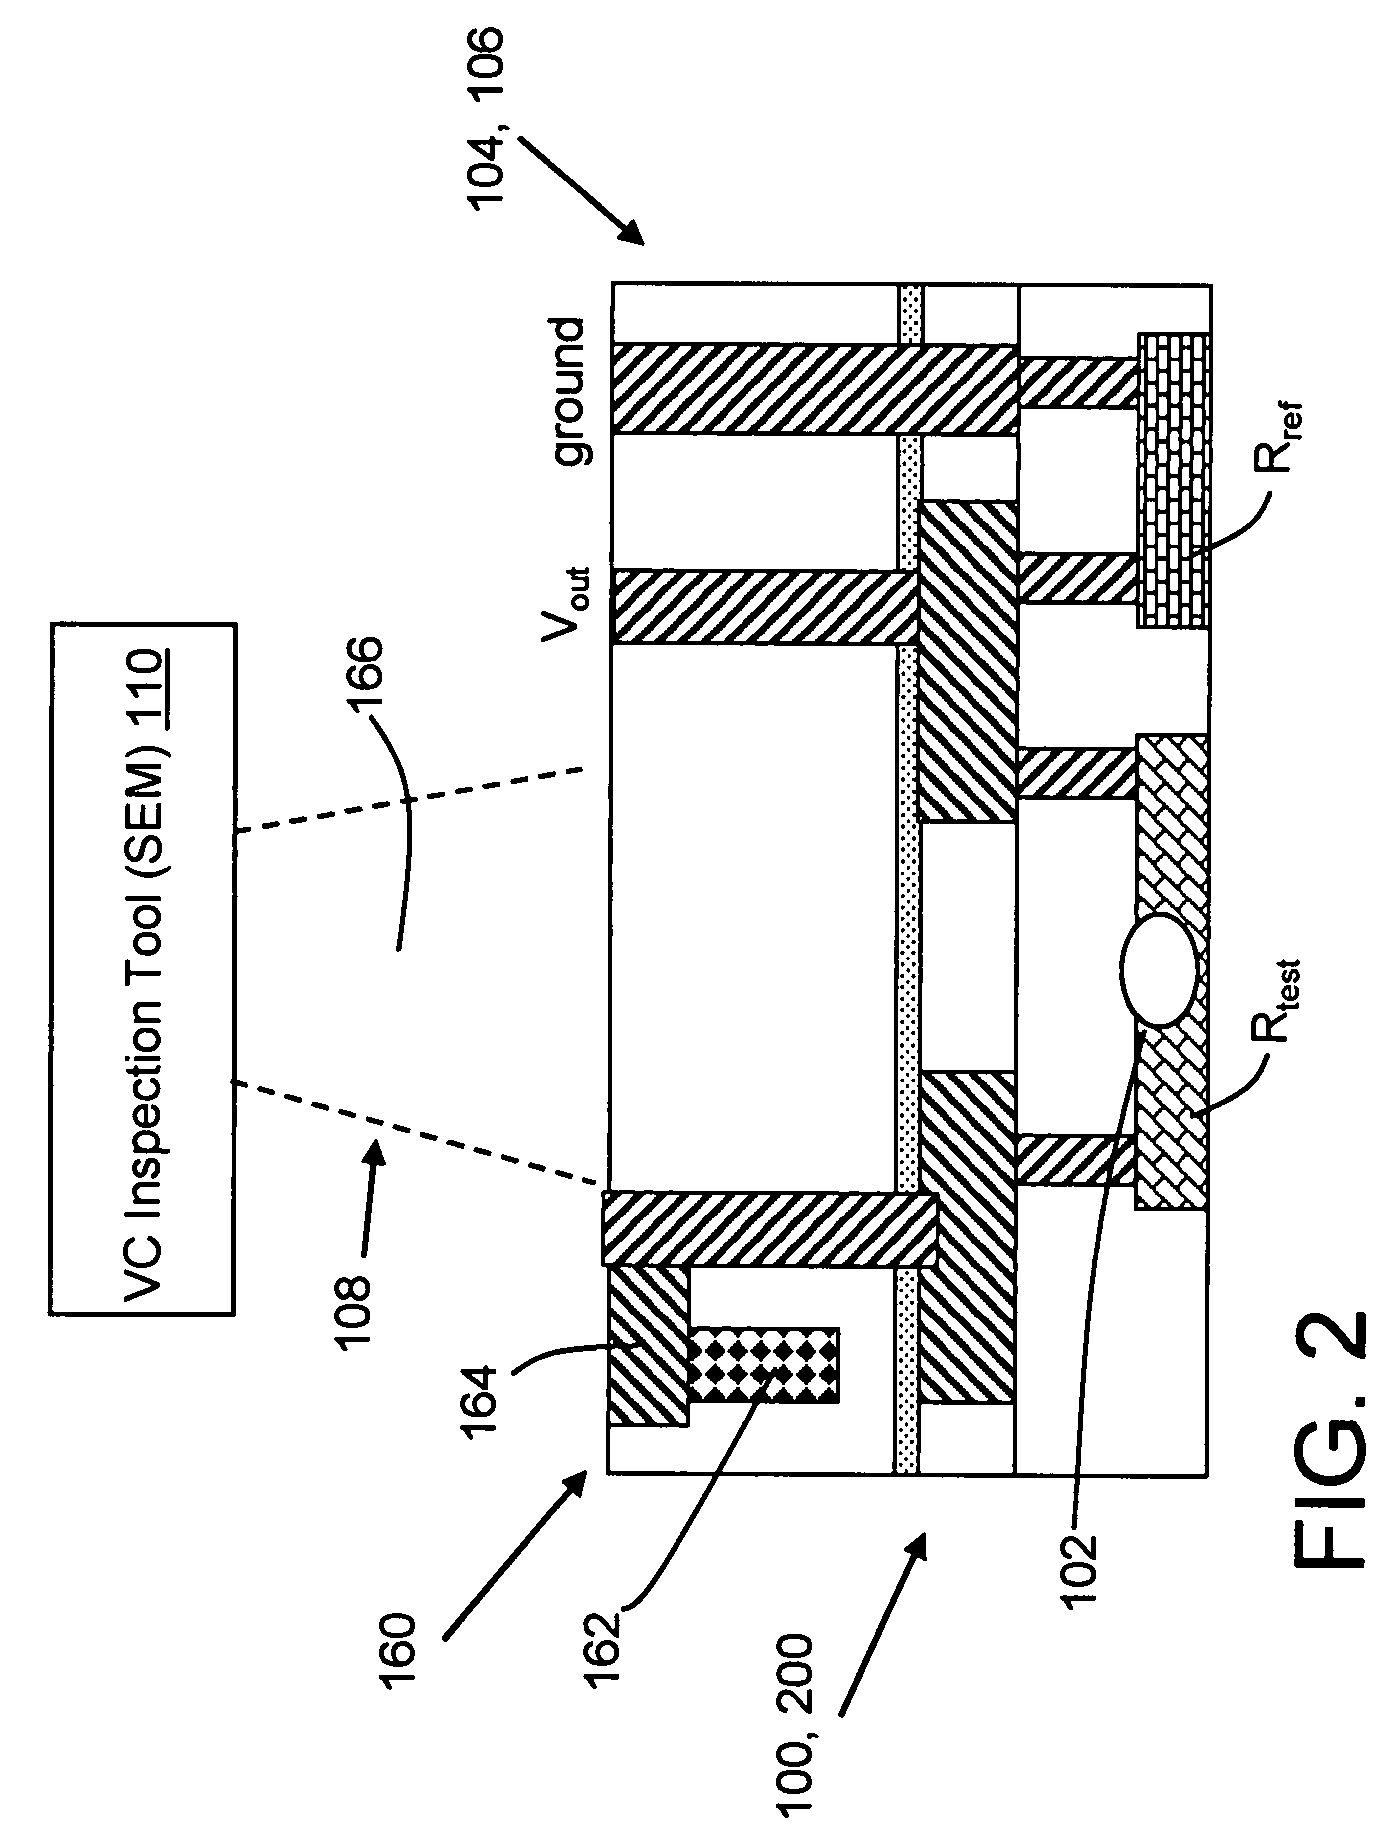 Test structure and method for resistive open detection using voltage contrast inspection